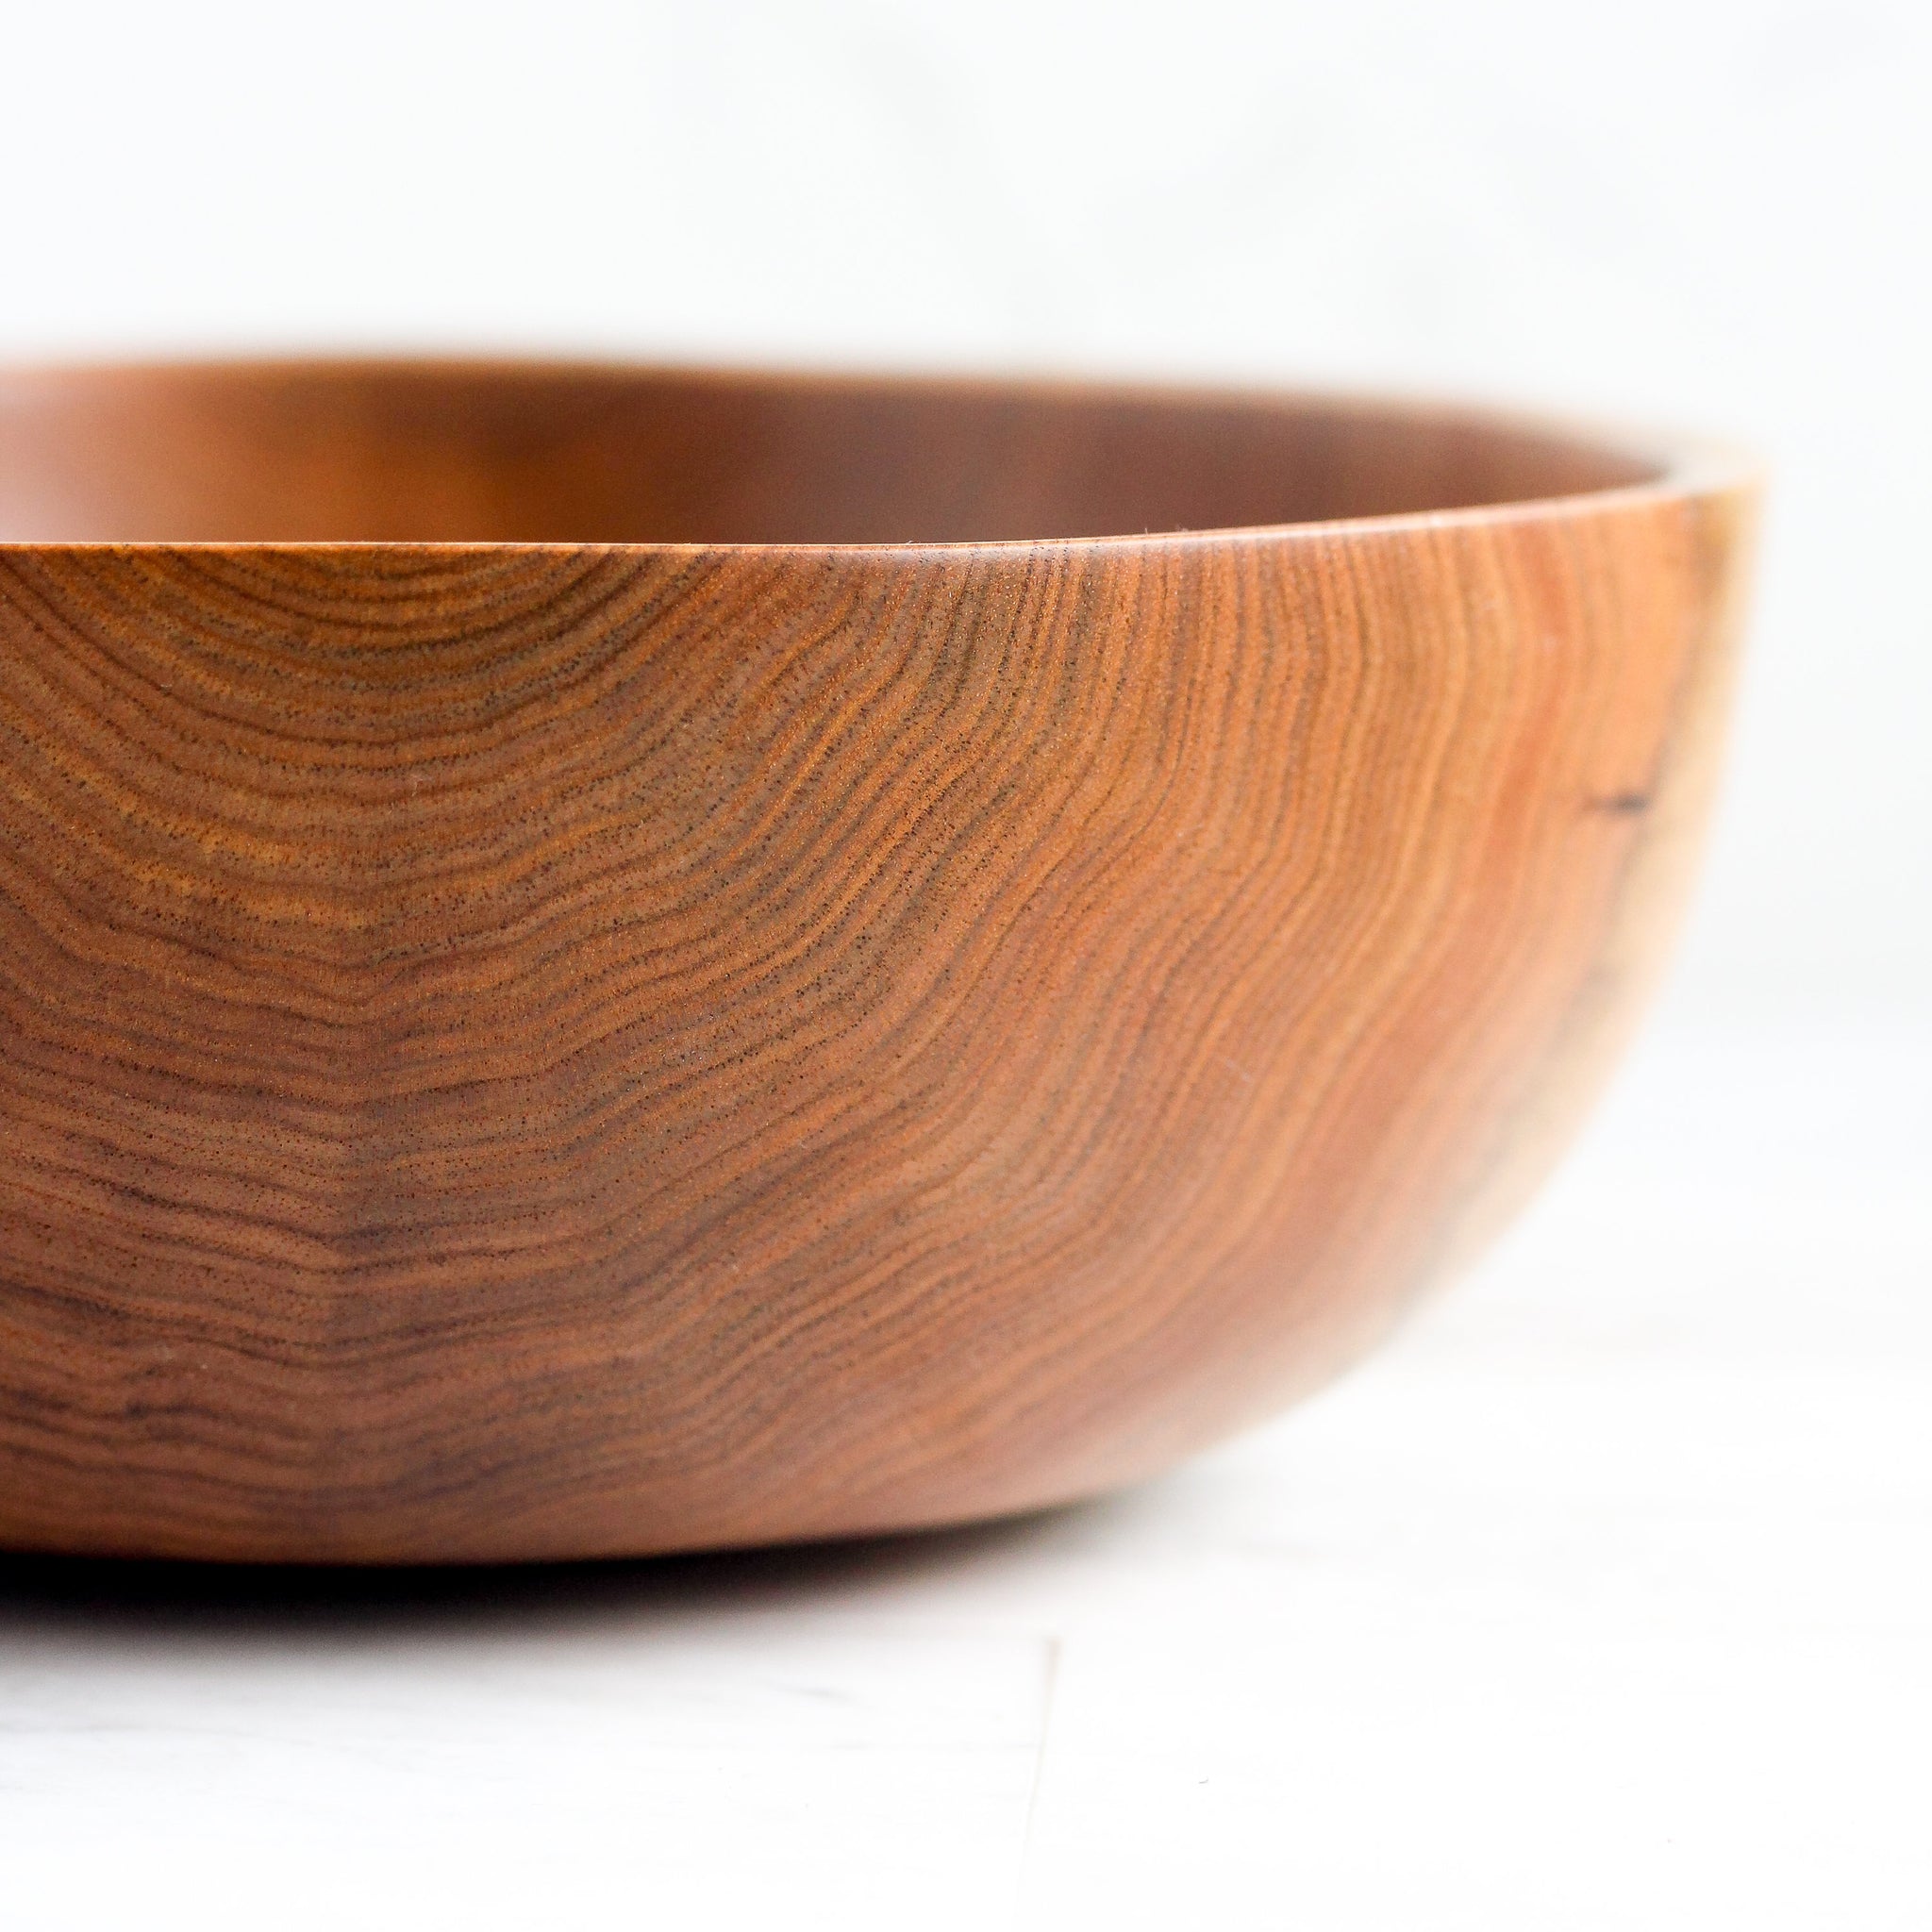 Butternut Wood Bowl, Small Dough Proofing Bowl